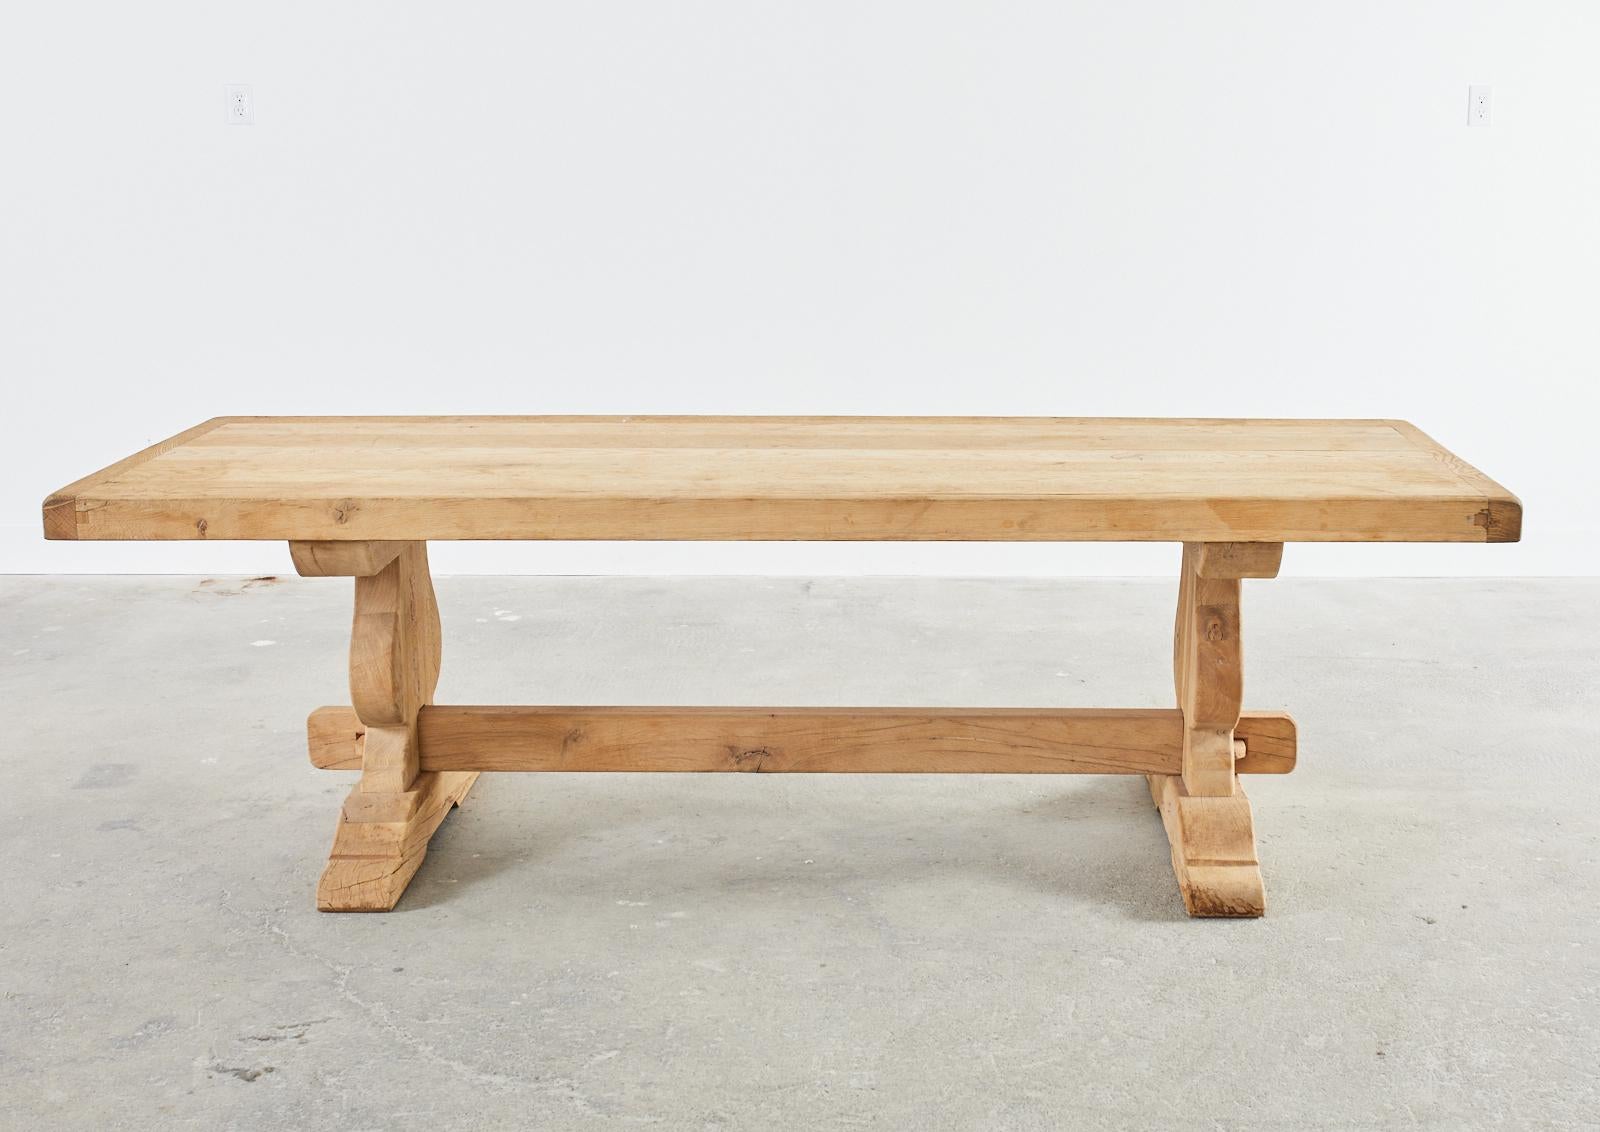 Massive country French provincial style farmhouse trestle dining table or harvest table. Hand-crafted from solid oak having a 3-inch thick plank top with breadboard ends. The trestle style base has spade shaped legs ending with 5 inch thick feet.